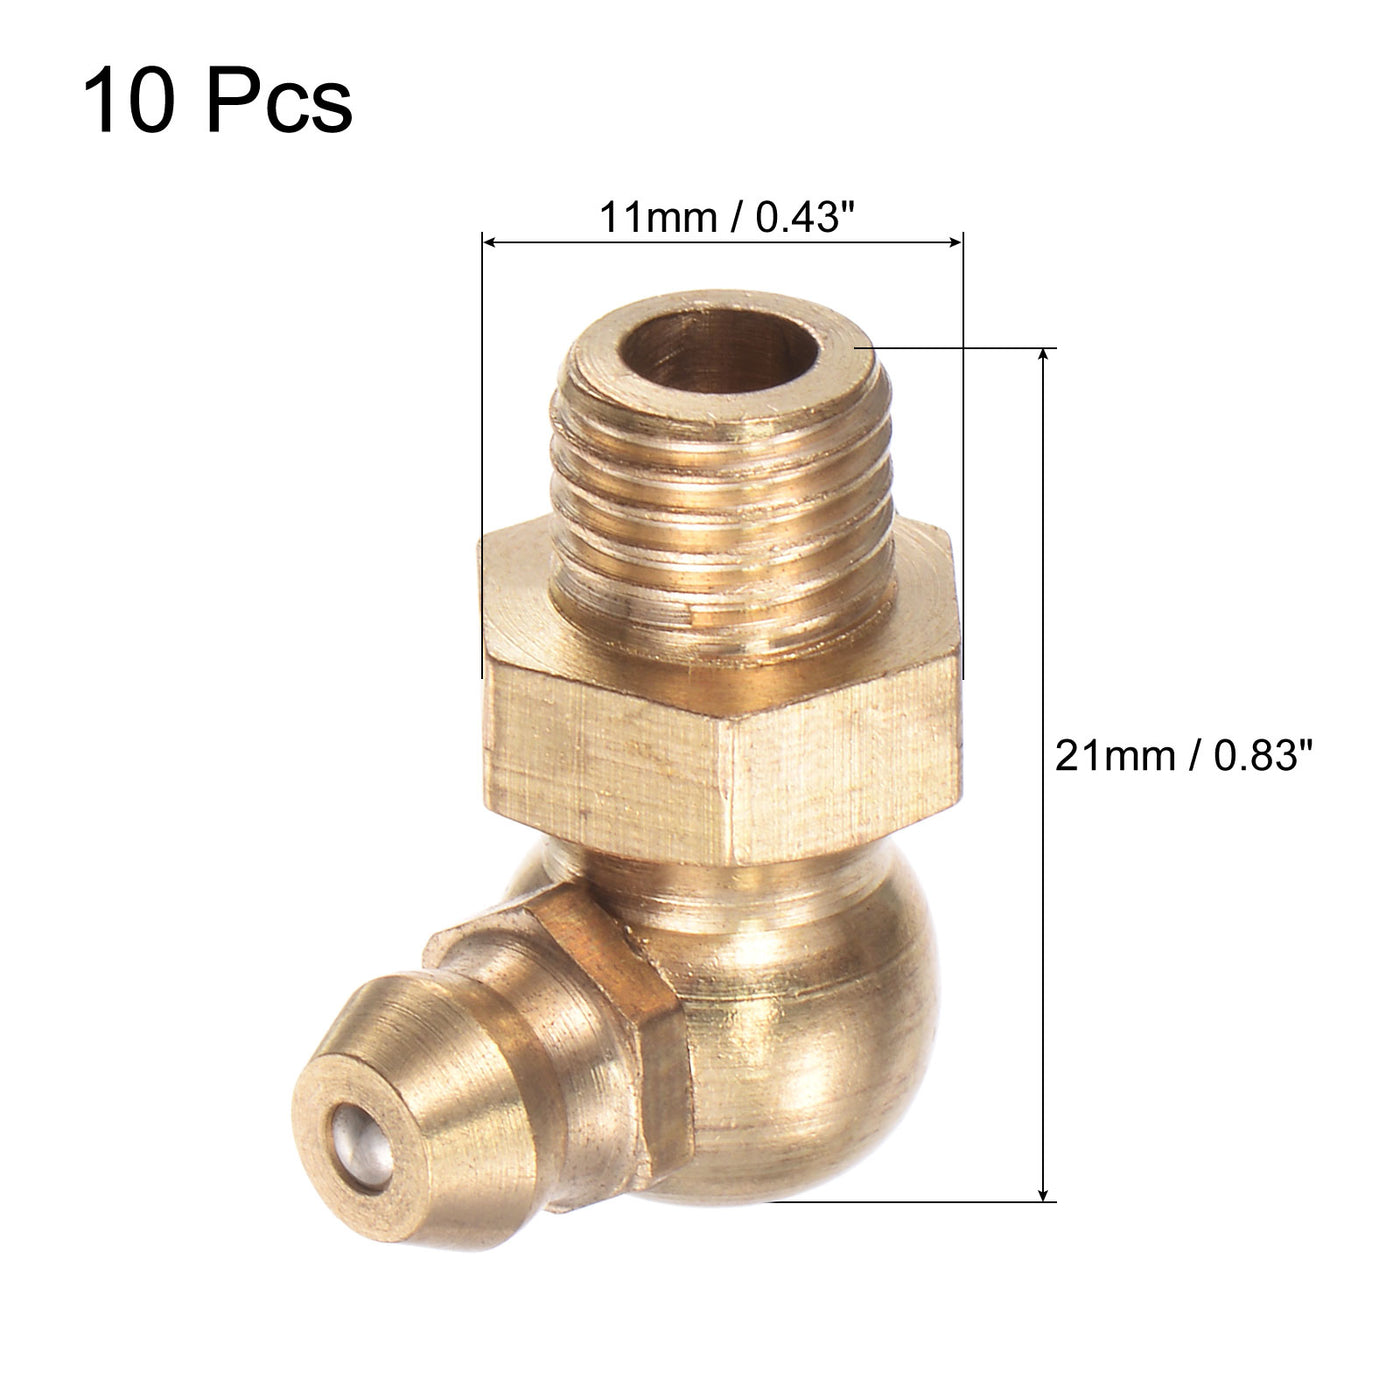 Uxcell Uxcell Brass 90 Degree Hydraulic Grease Fitting M8 x 1mm Thread, 10Pcs